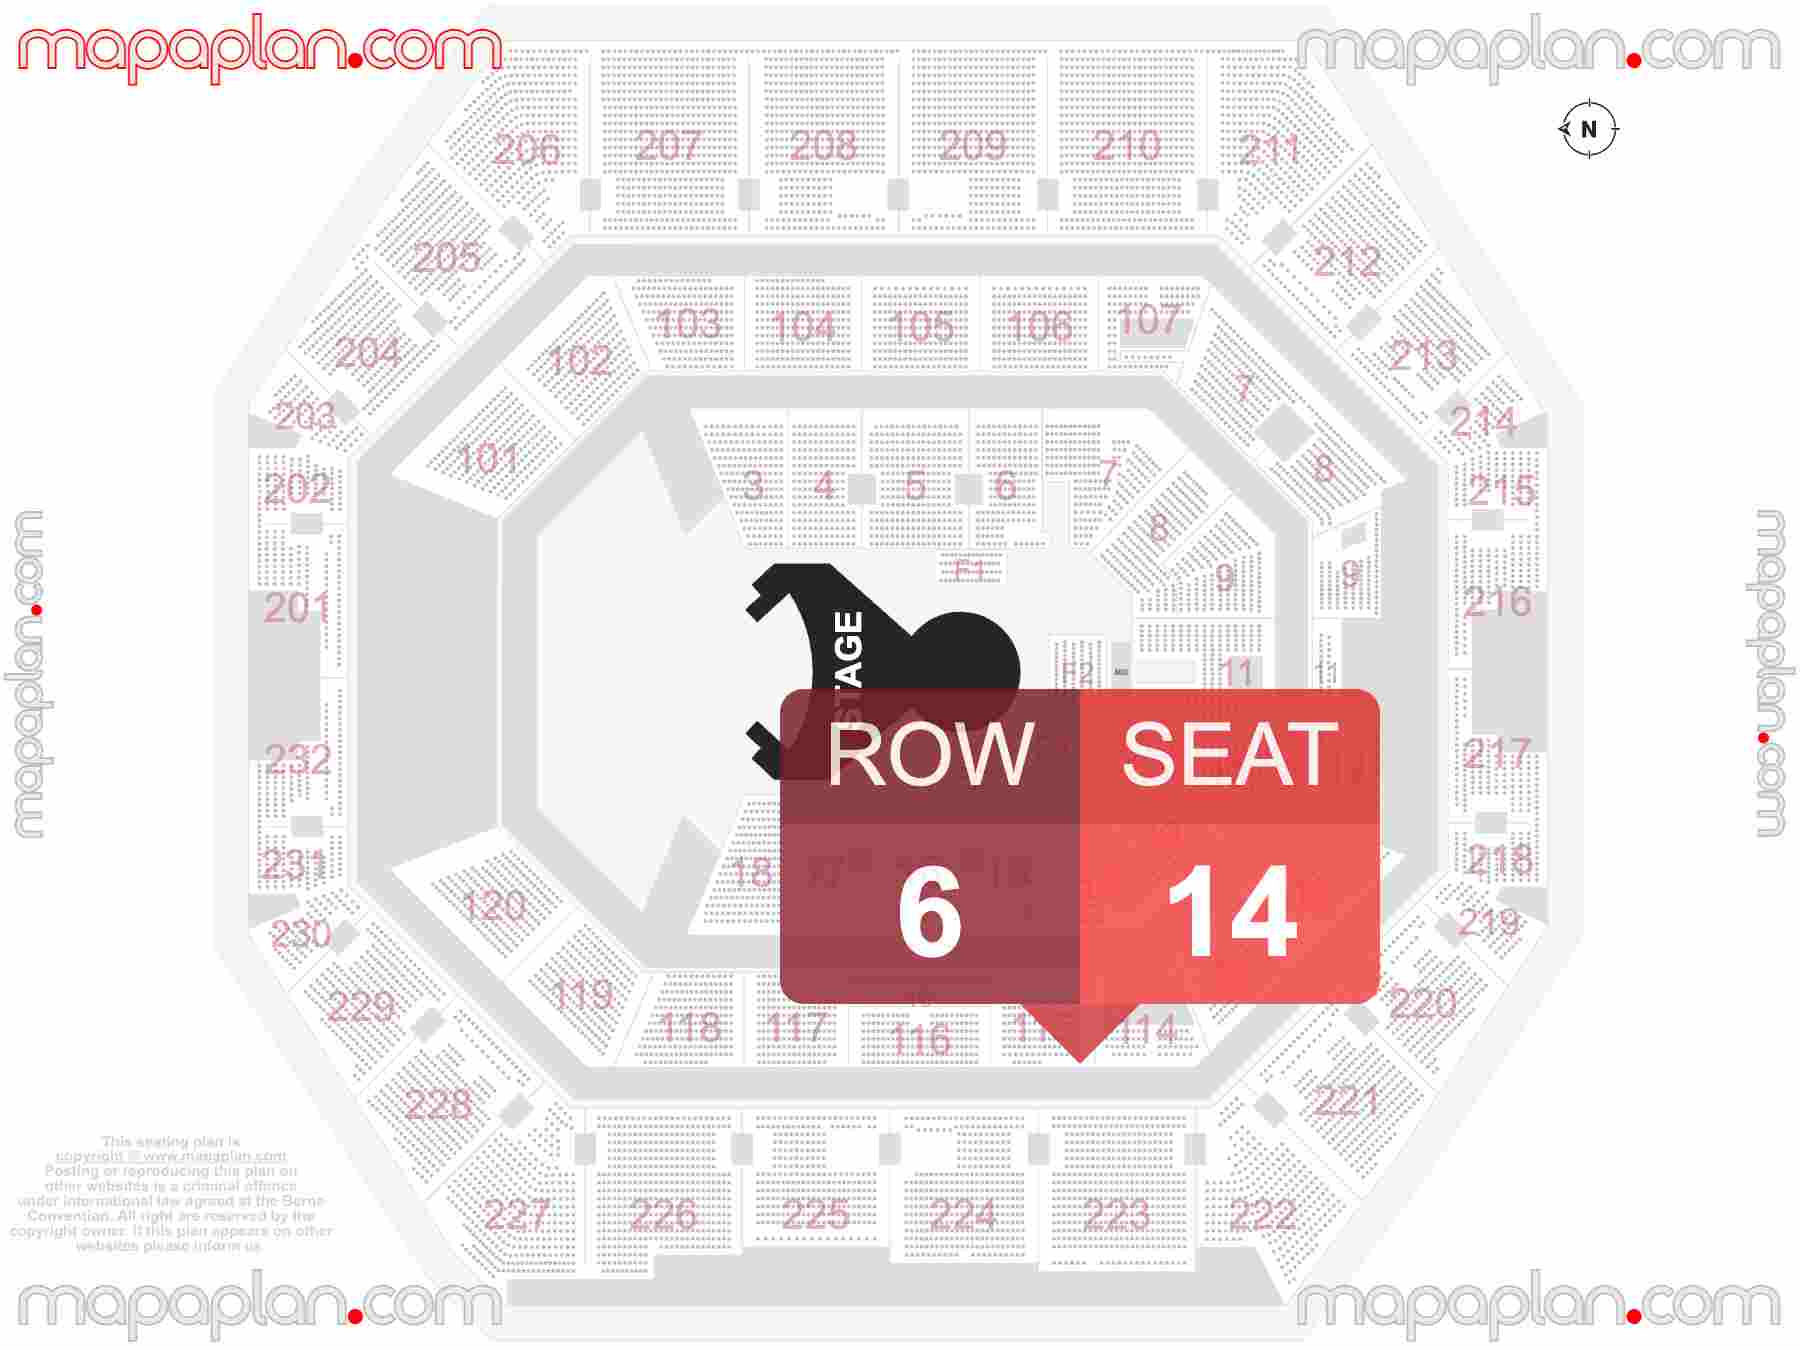 Indianapolis Gainbridge Fieldhouse seating chart Cirque du Soleil seating plan - Interactive map to find best seat and row numbers